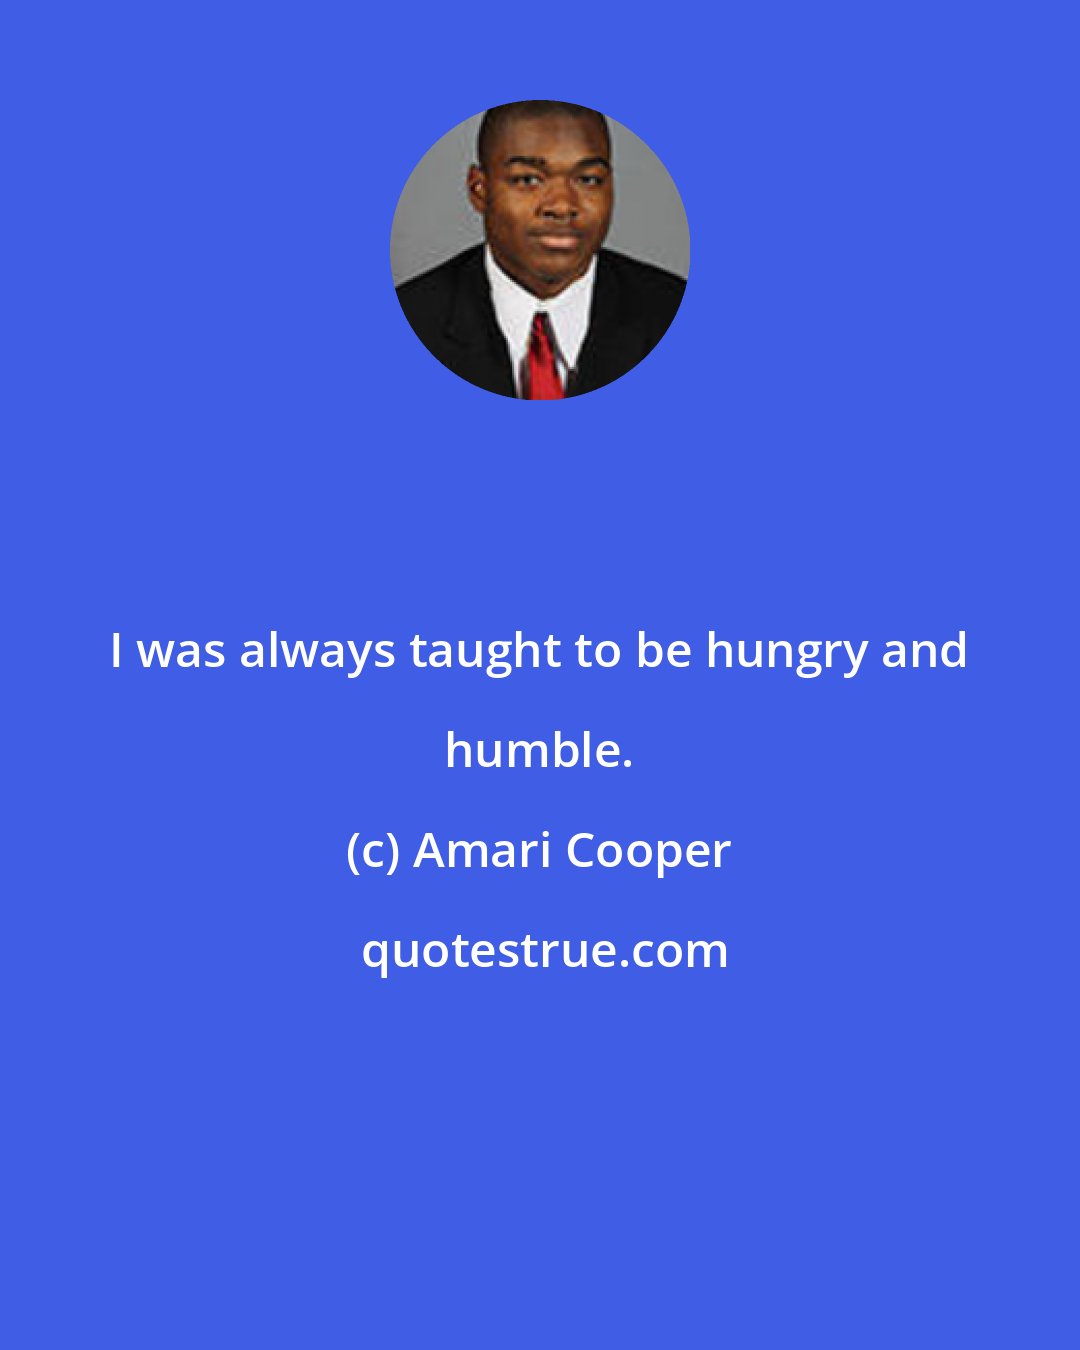 Amari Cooper: I was always taught to be hungry and humble.